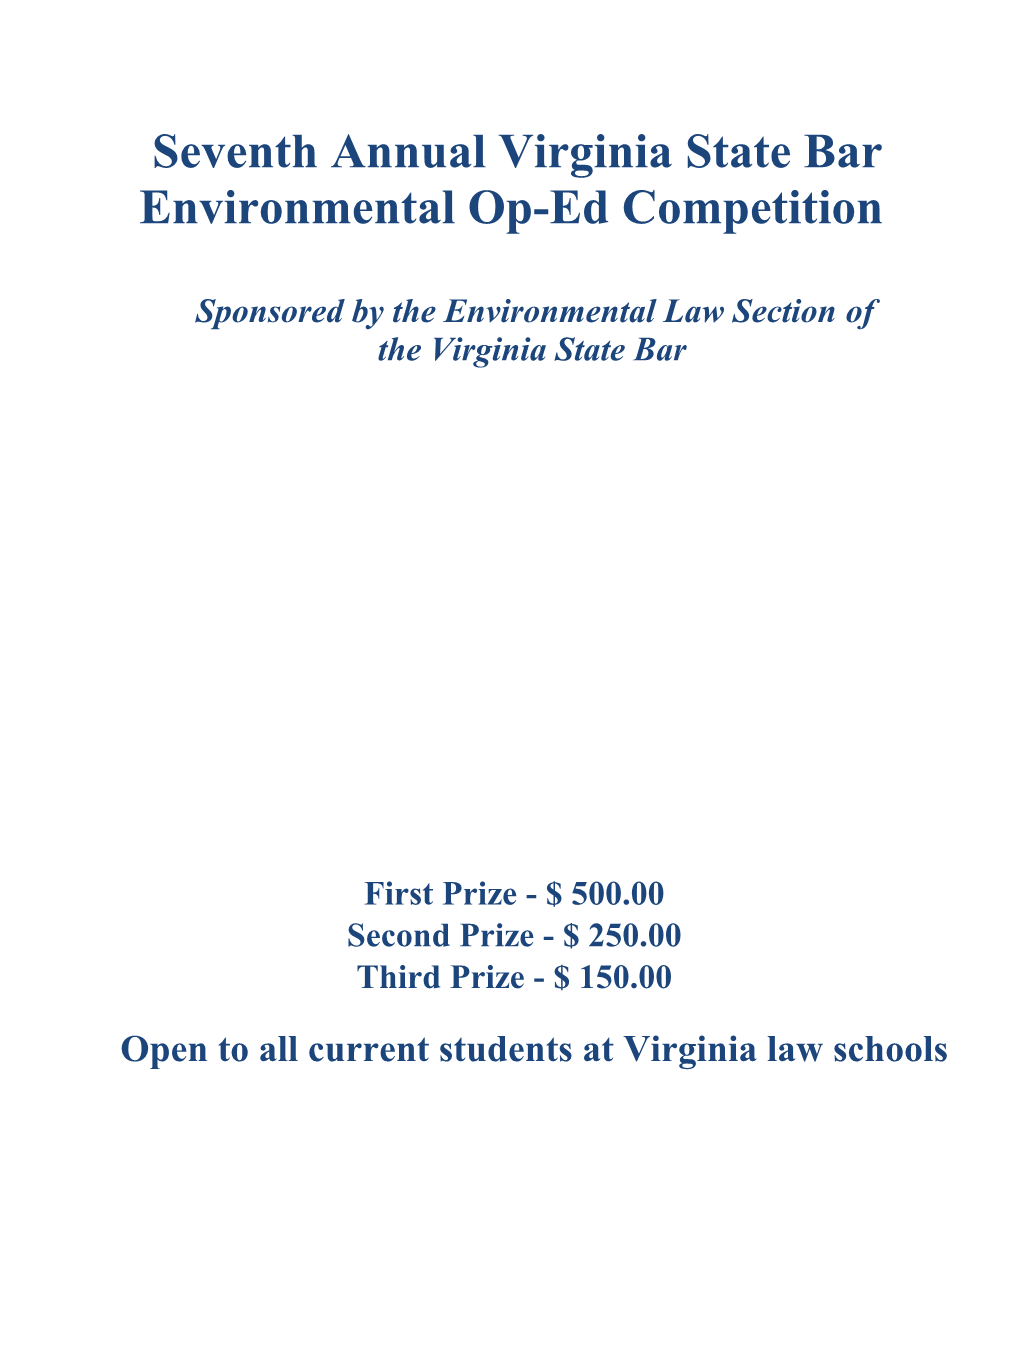 Seventh Annual Virginia State Bar Environmental Op-Ed Competition